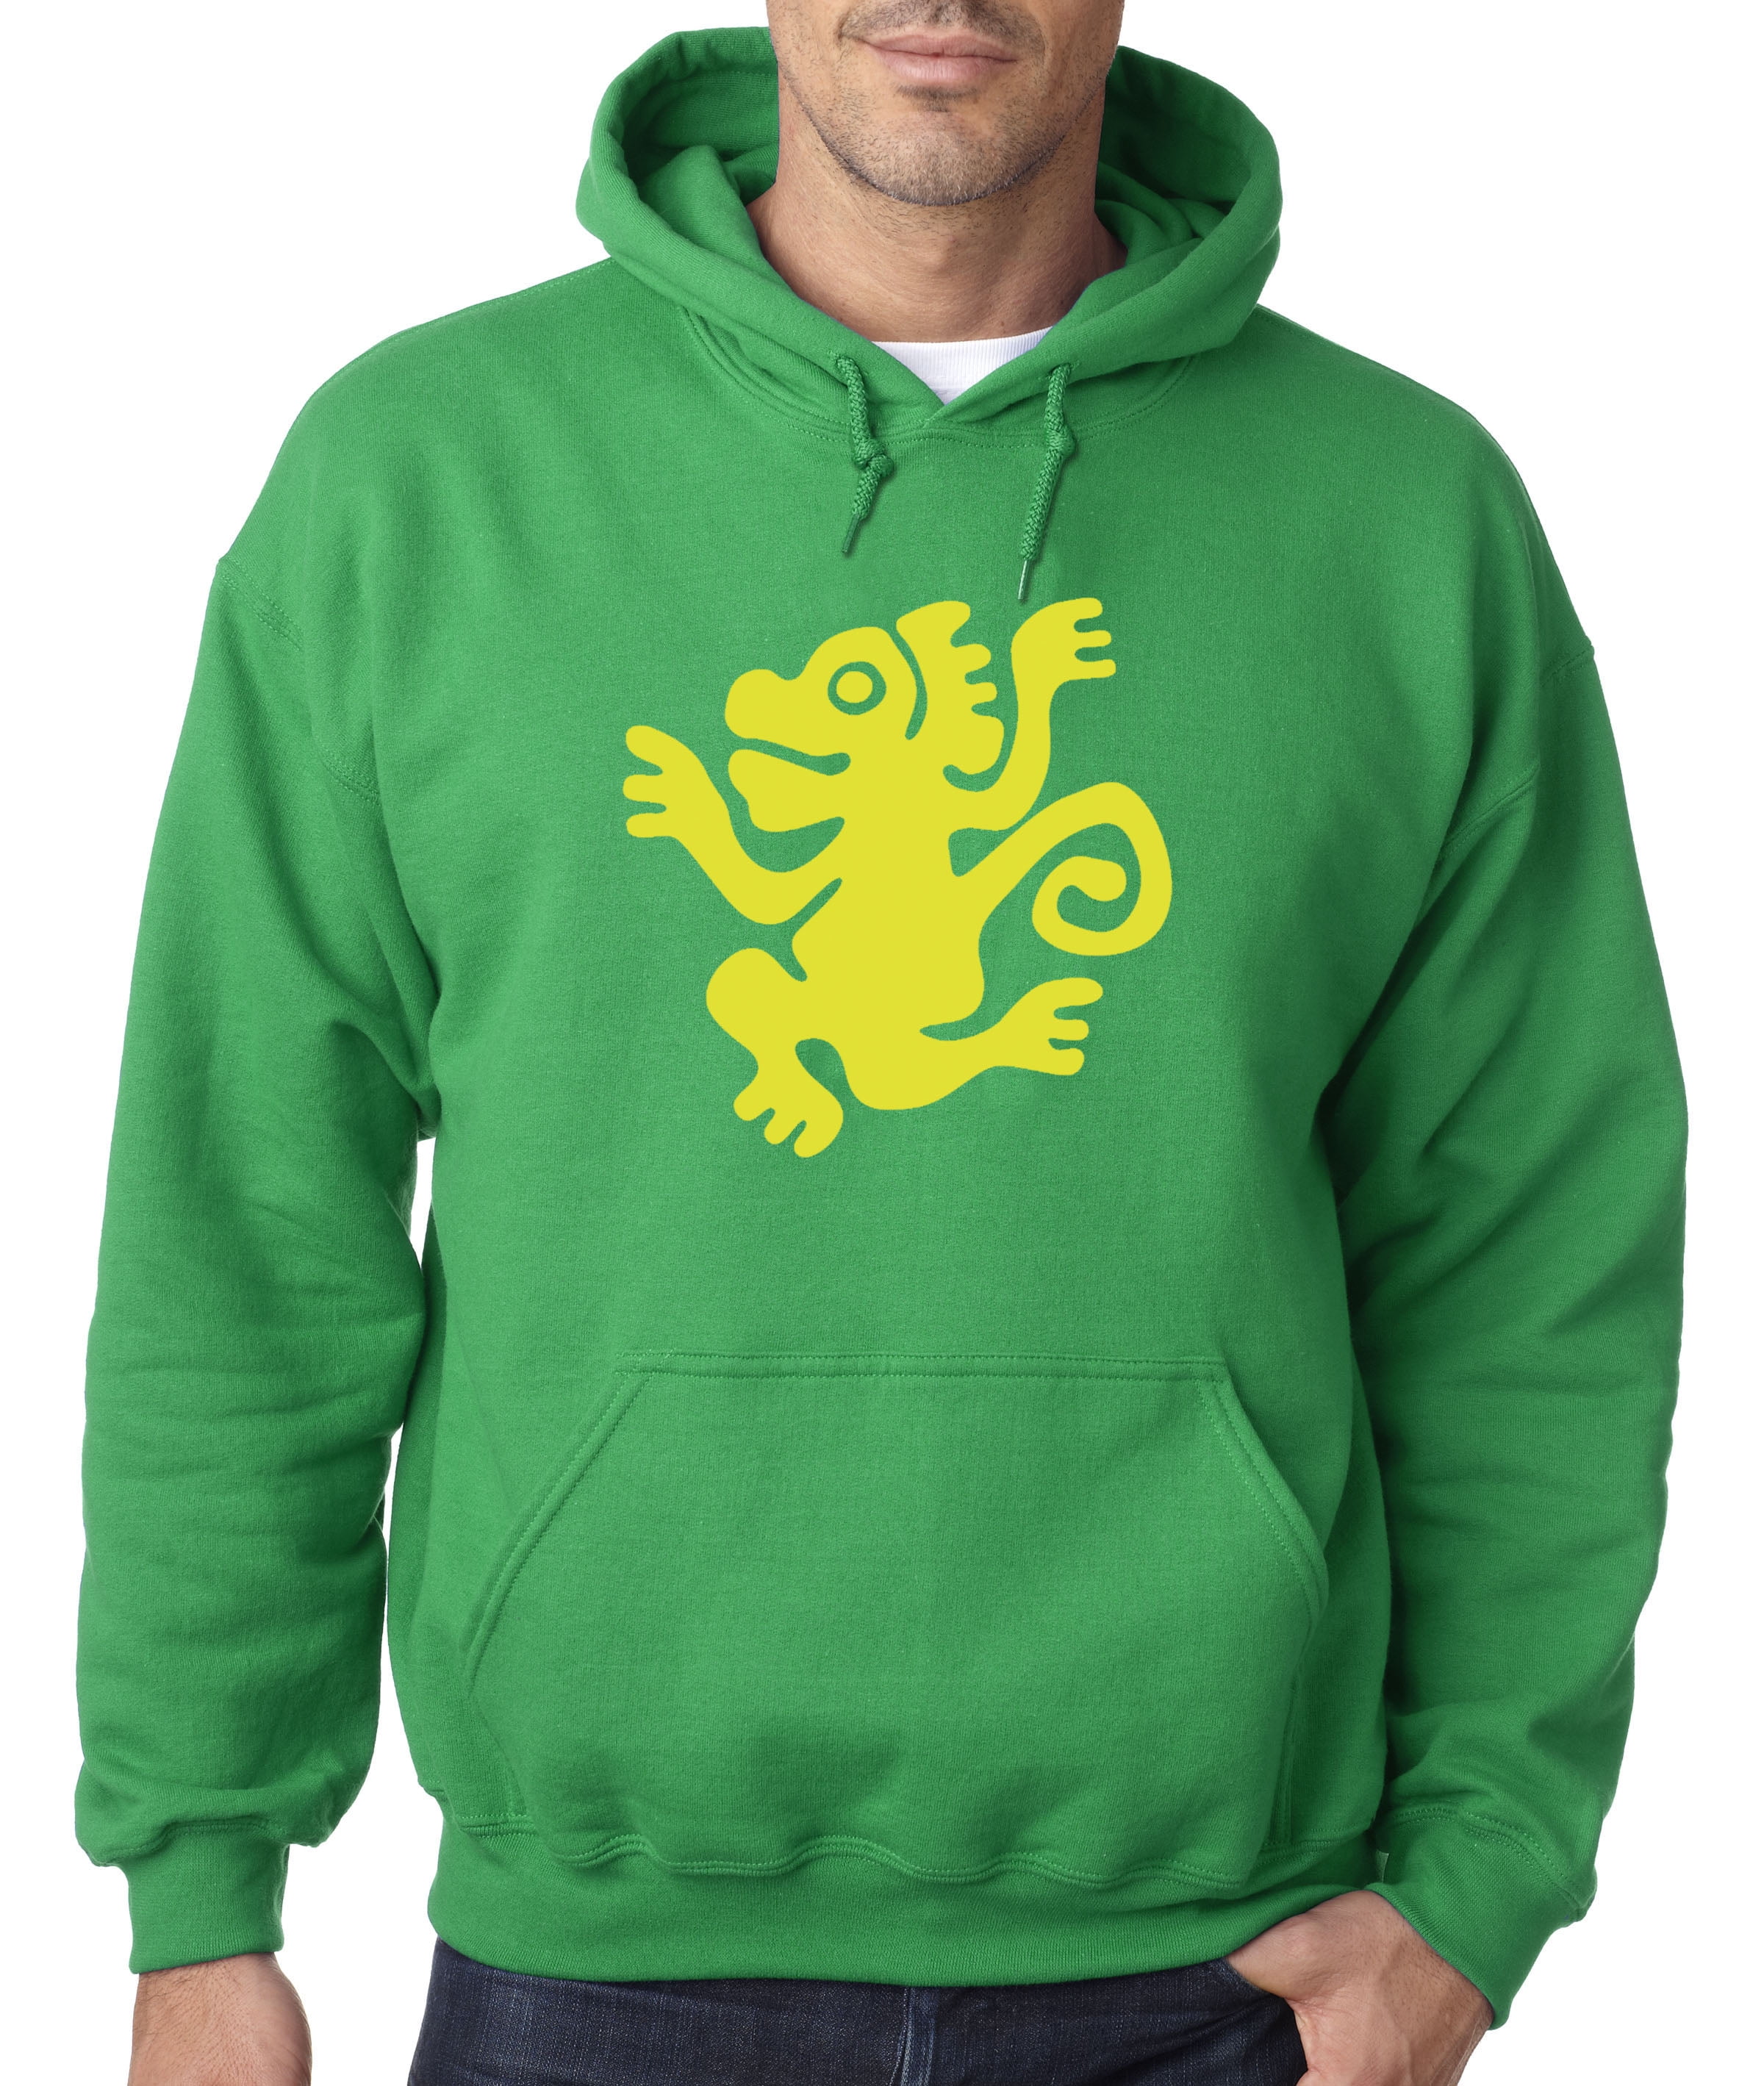 Coolest Monkey in the Jungle Hoodie Unisex adult Pullover S-3XL Free shipping.